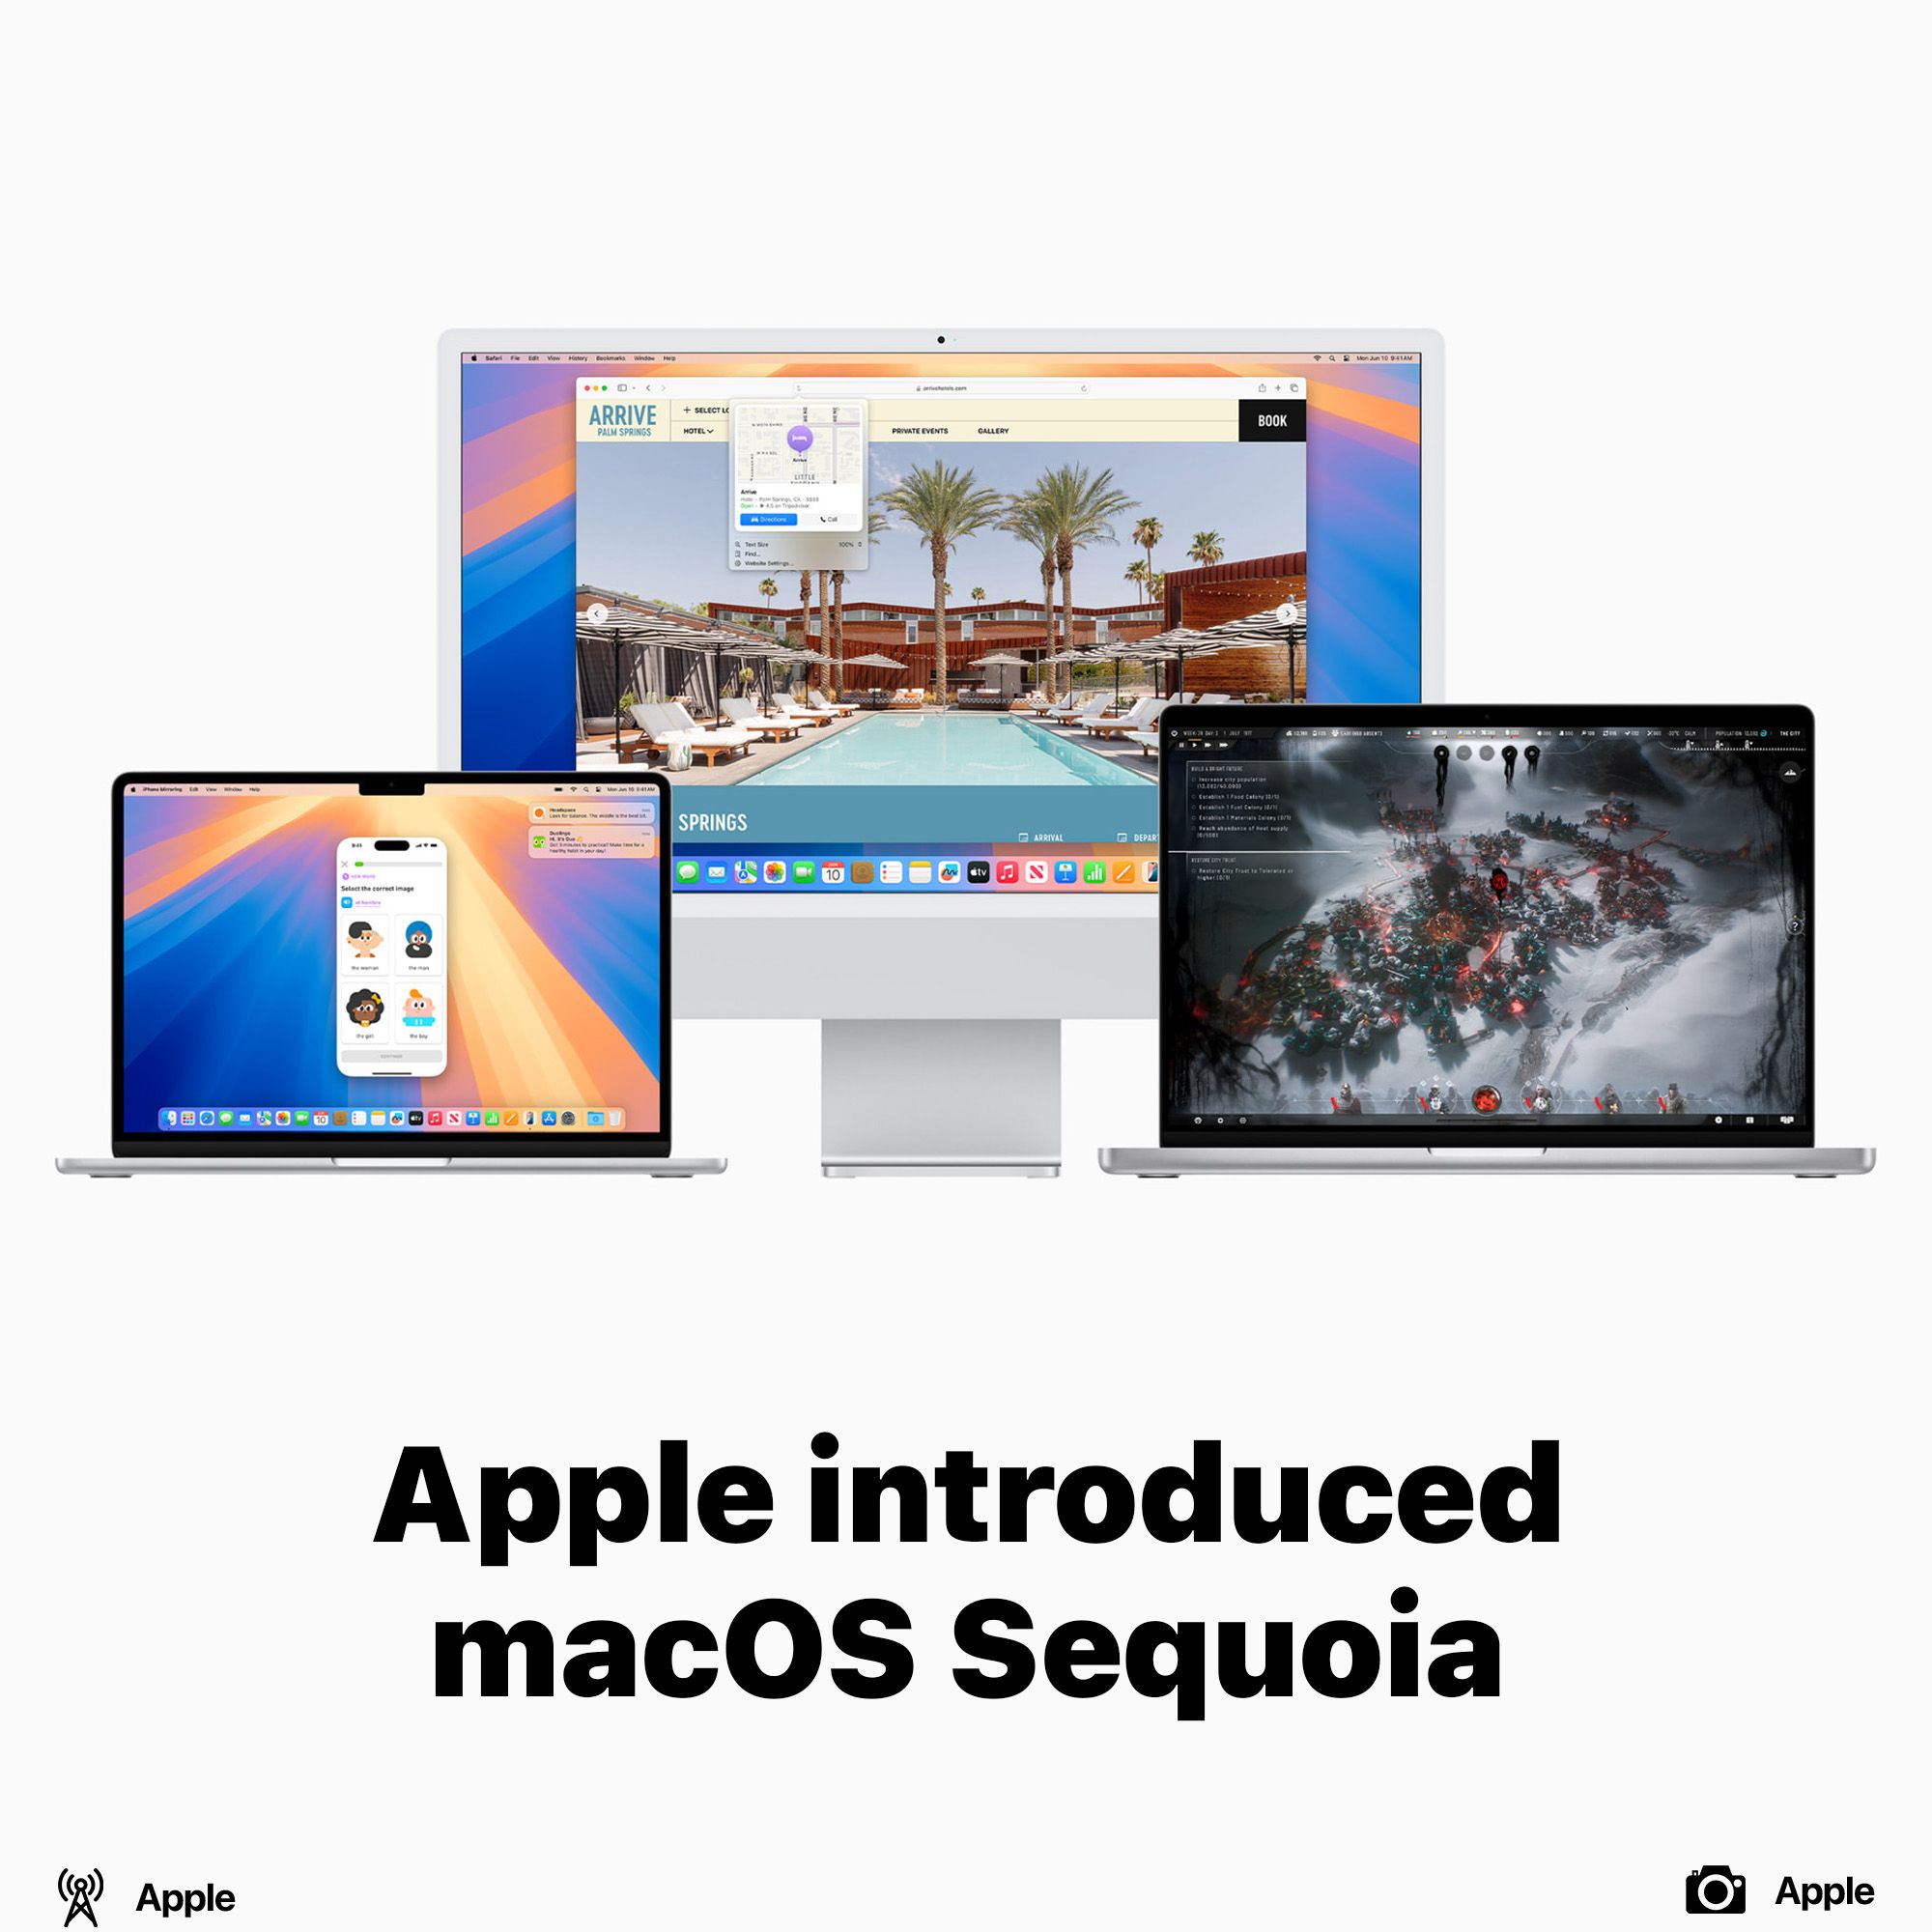 Apple introduced macOS Sequoia